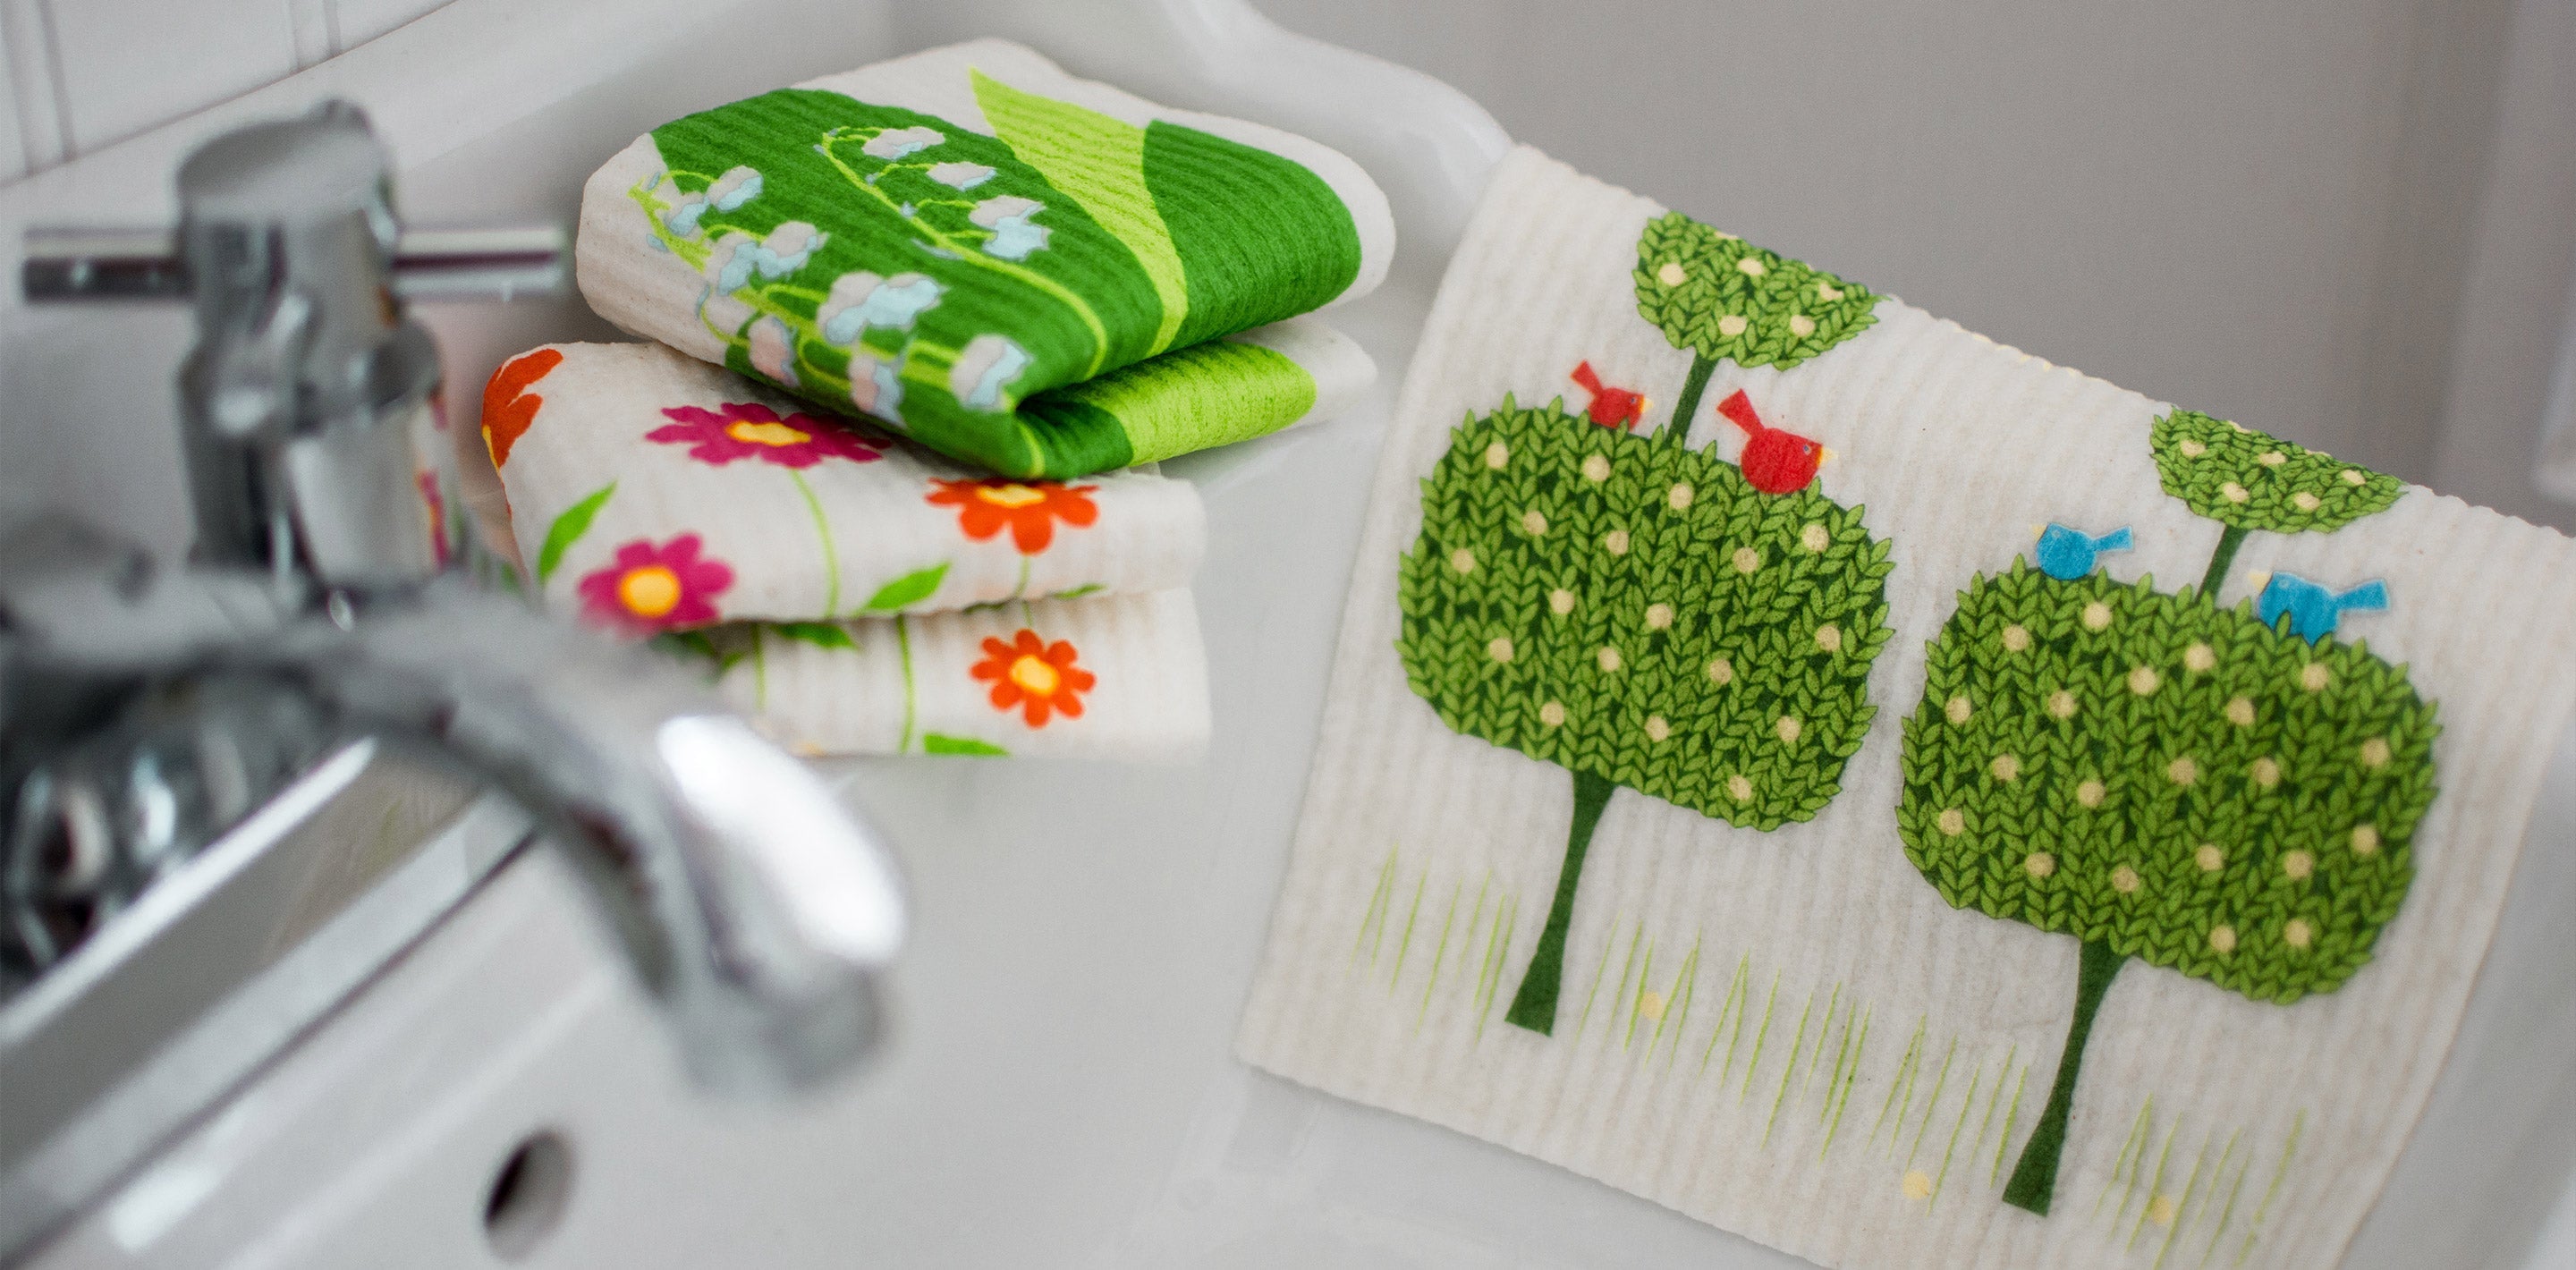 s No. 1 bestselling Swedish Dishcloths are on sale